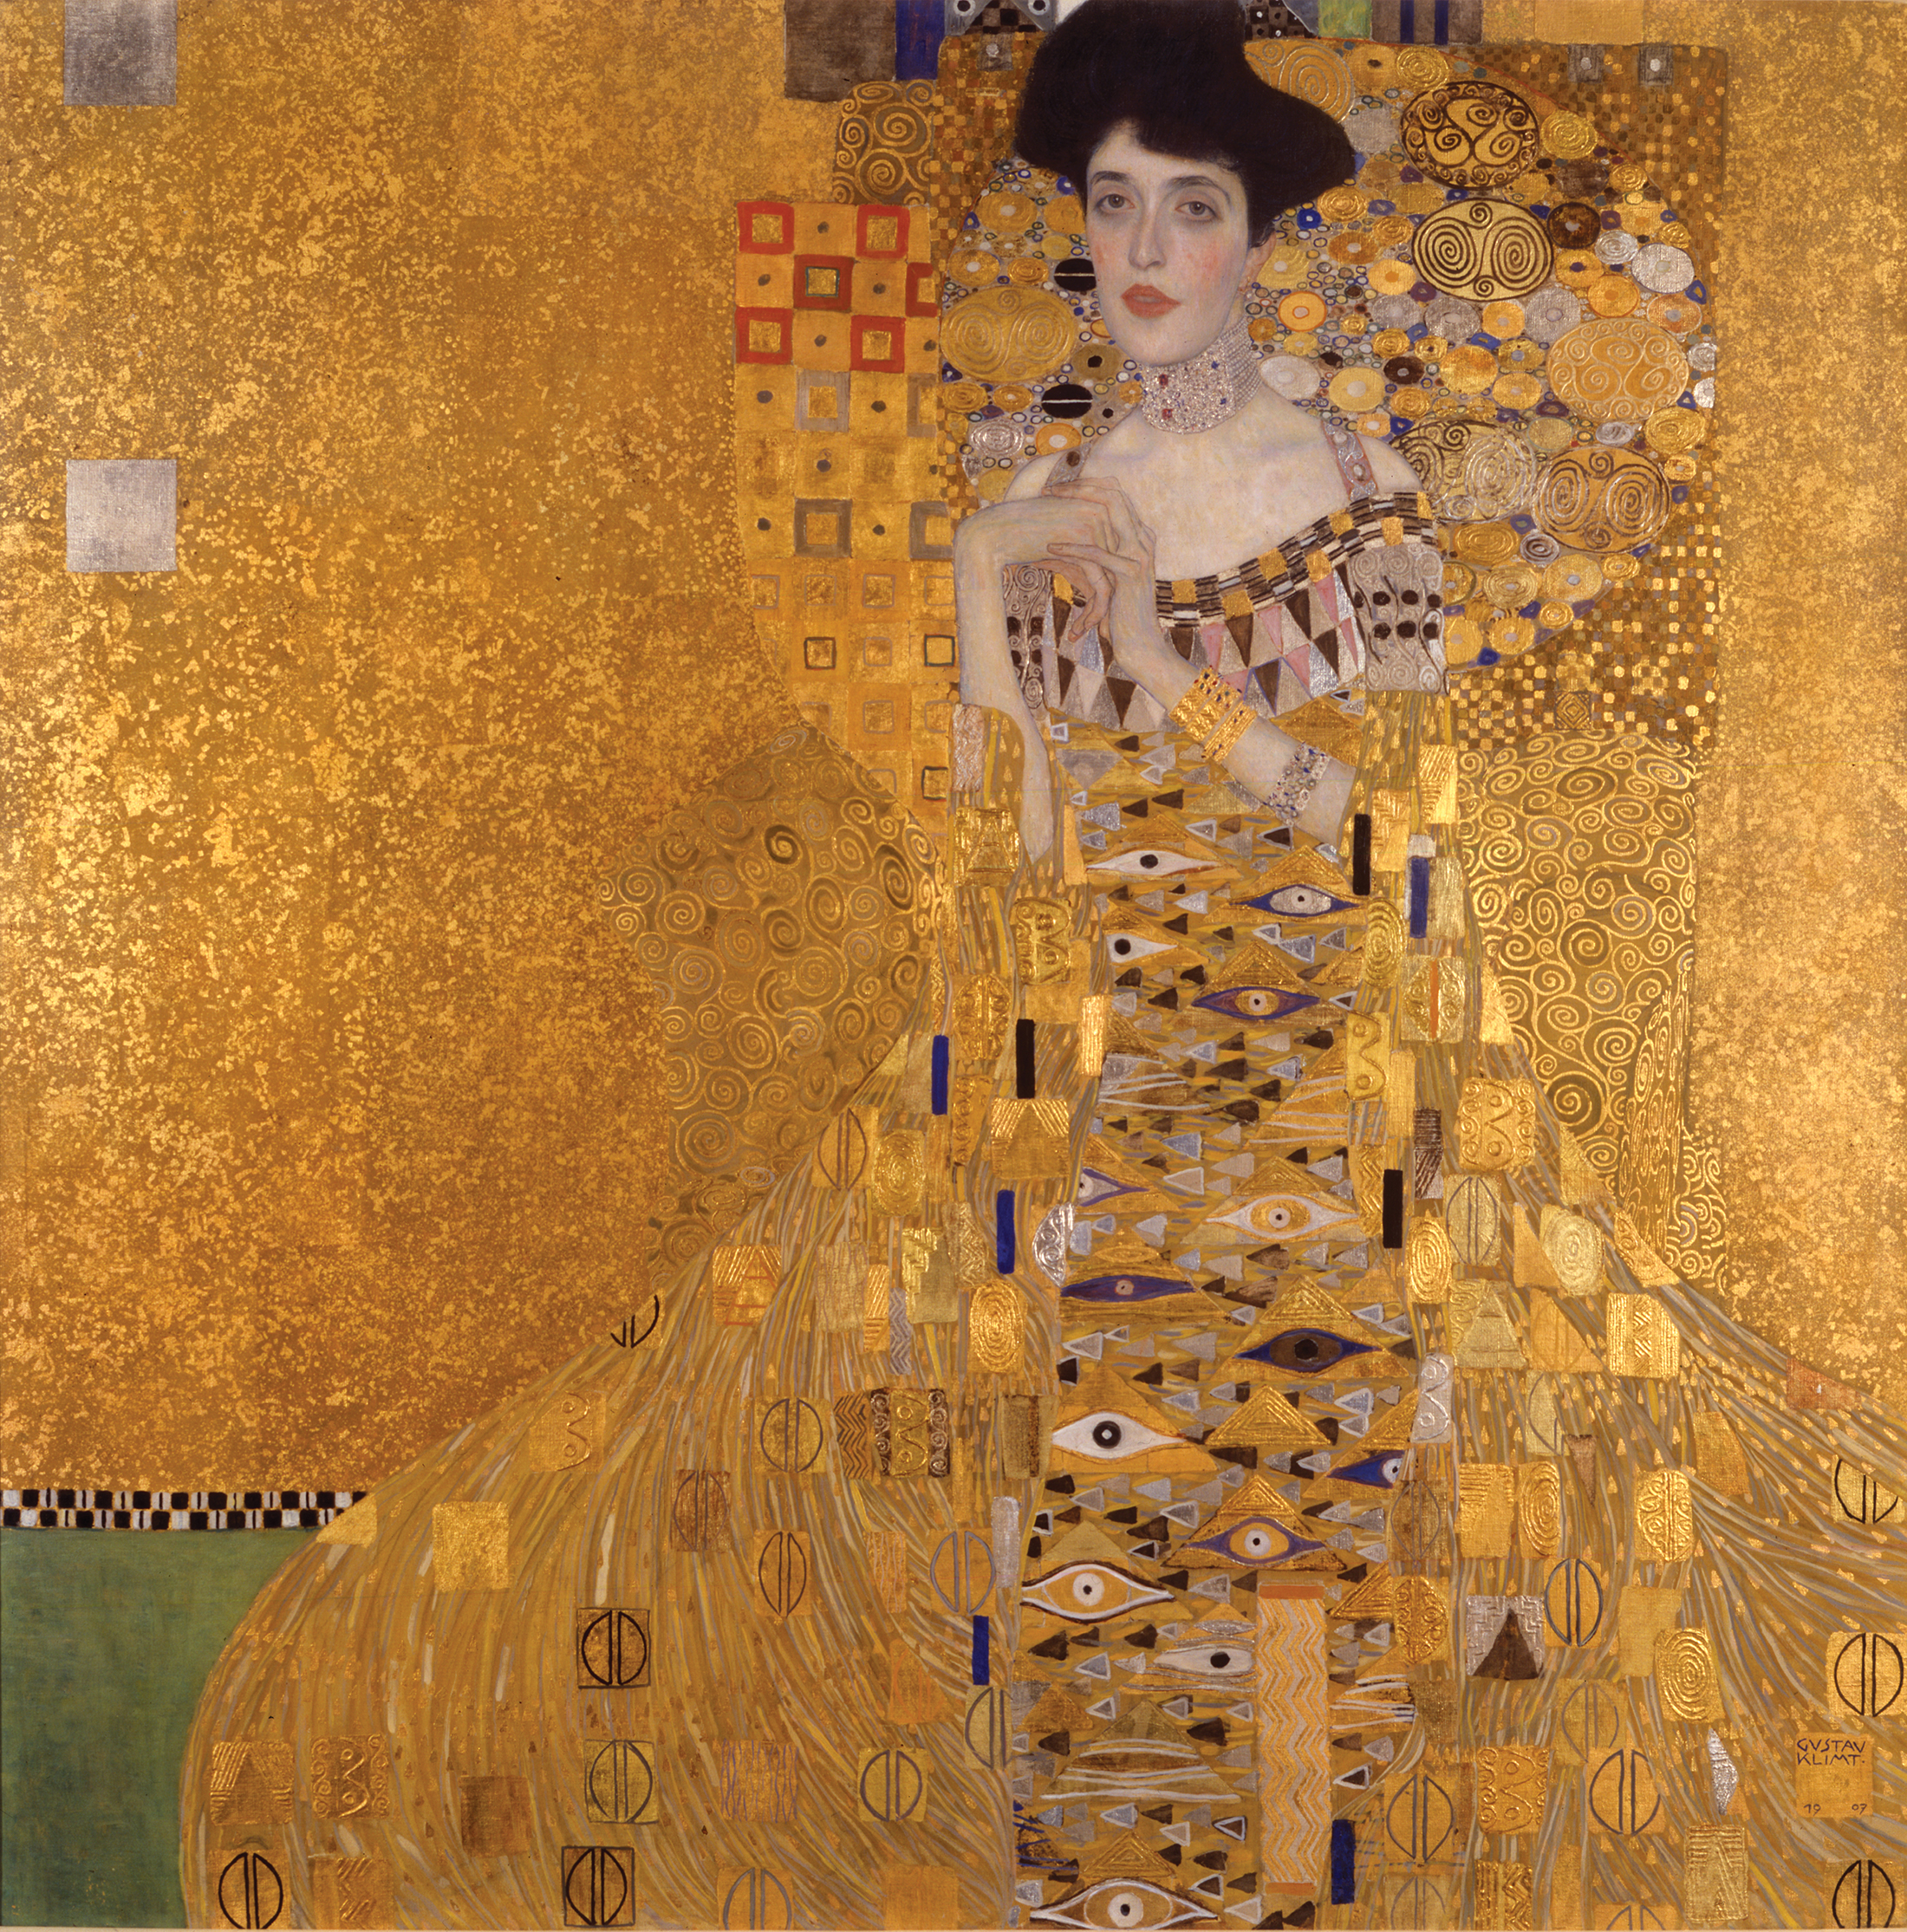 Portrait of Adele Bloch-Bauer I, 1907 Gold, silver, and oil on canvas Neue Galerie New York. Acquired through the generosity of Ronald S. Lauder, the heirs of the Estates of Ferdinand and Adele Bloch-Bauer, and the Estée Lauder Fund